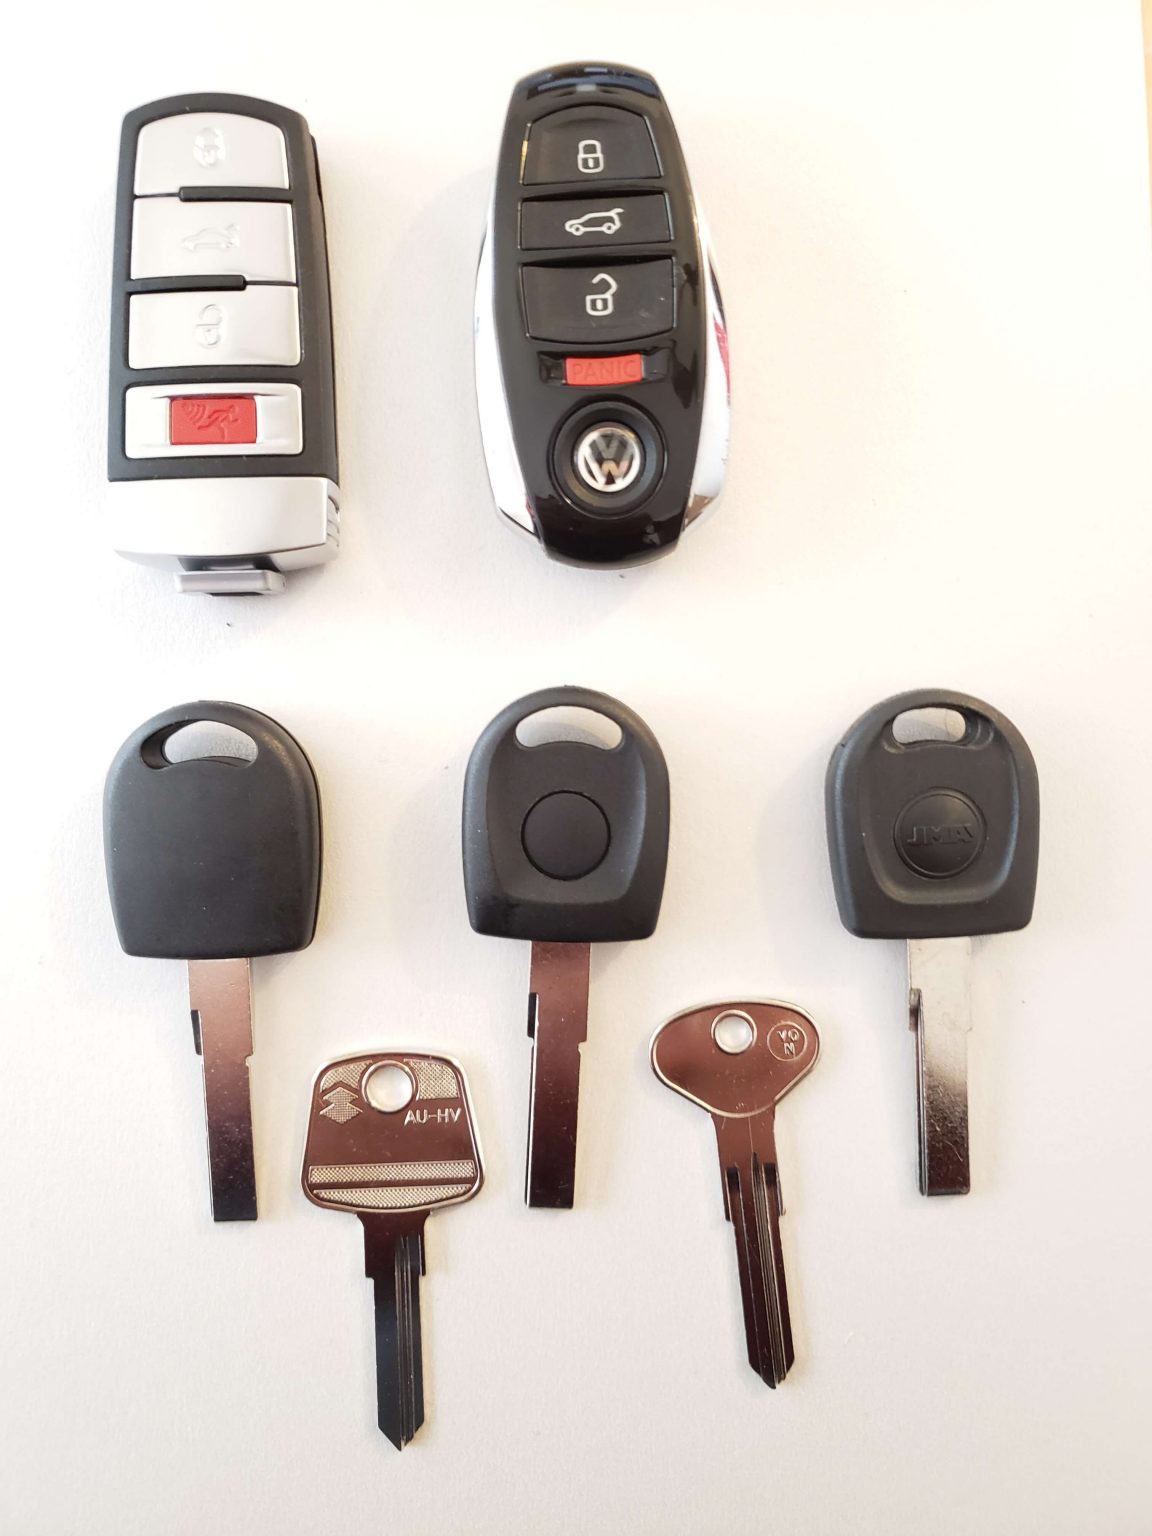 Volkswagen Key Replacement - What To Do, Options, Costs, Tips & More